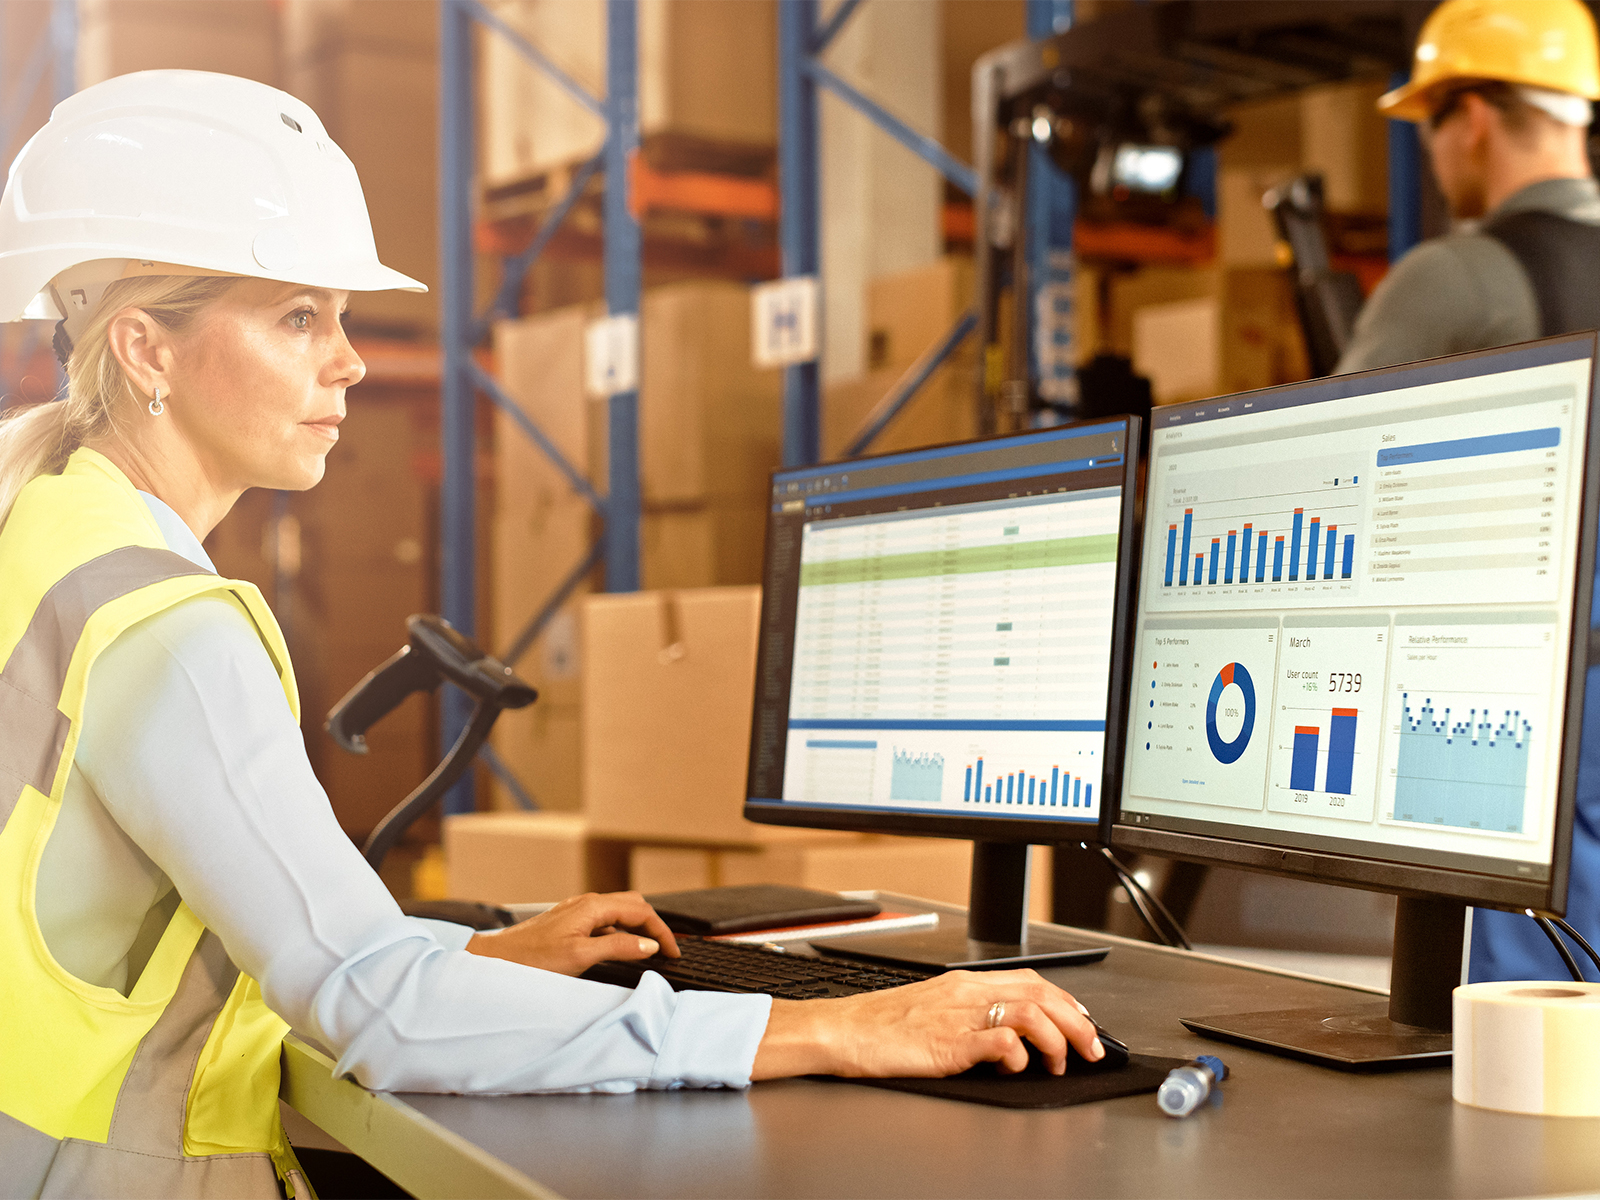 Woman working in warehouse on computer